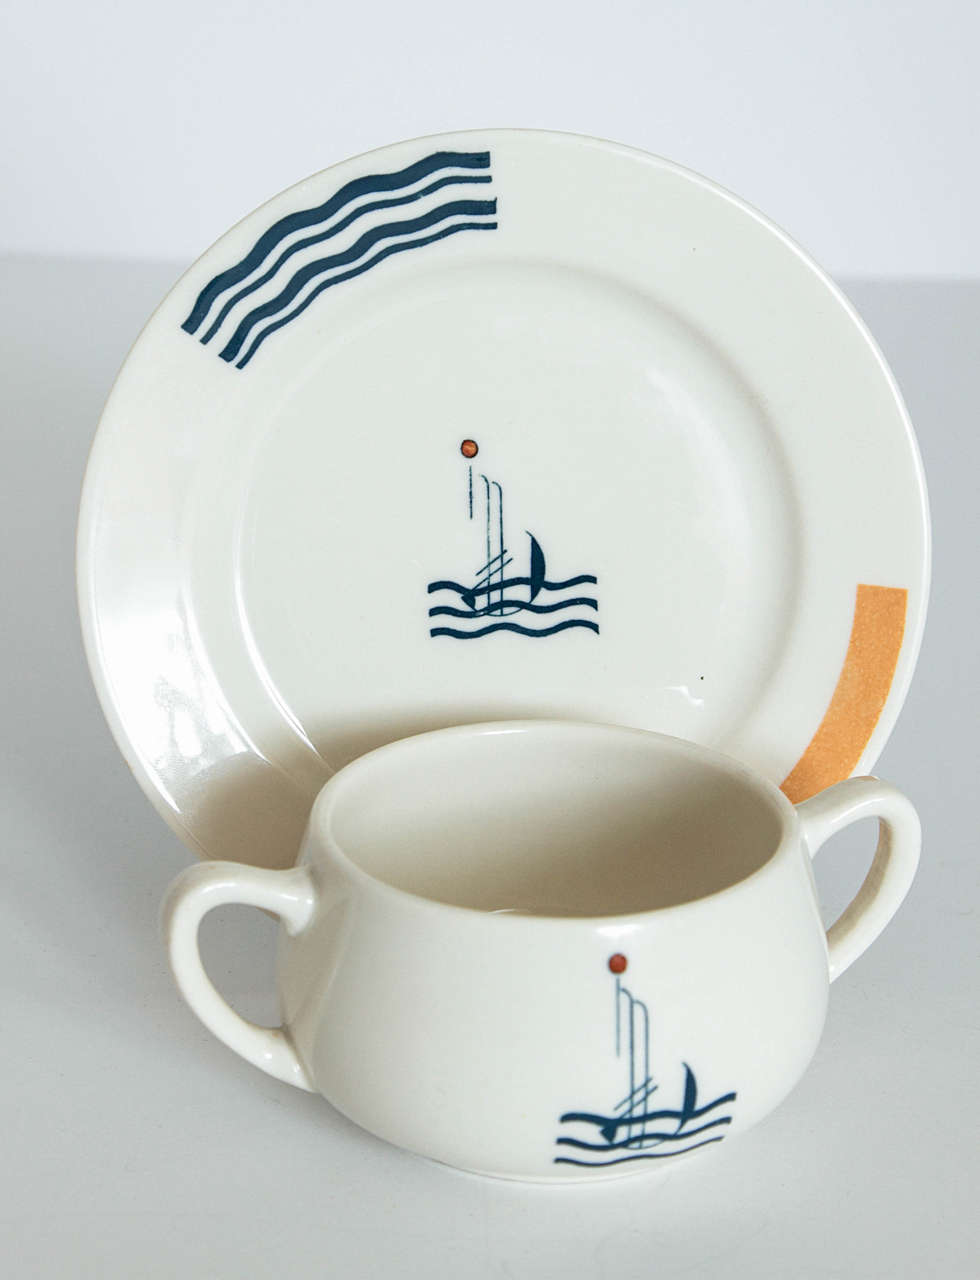 Ceramic Art Deco S.S. Leviathan Two-Piece Matched Pairs Serveware, Eugene and Lee Schoen For Sale